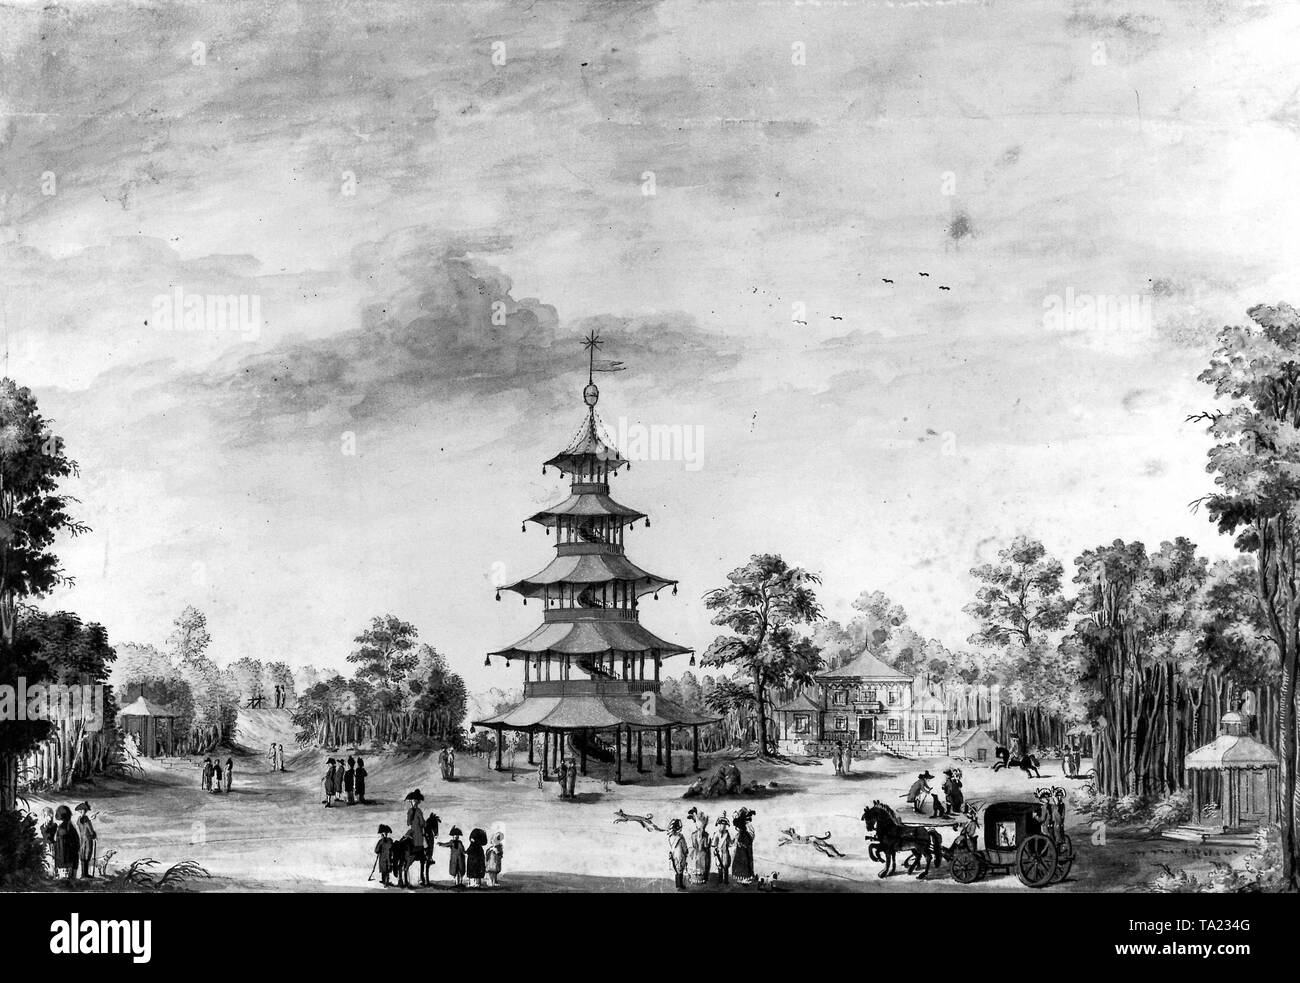 The first representation of the English Garden with the Chinese Tower in Munich. Auqarelll by an unknown artist from around 1790. Stock Photo